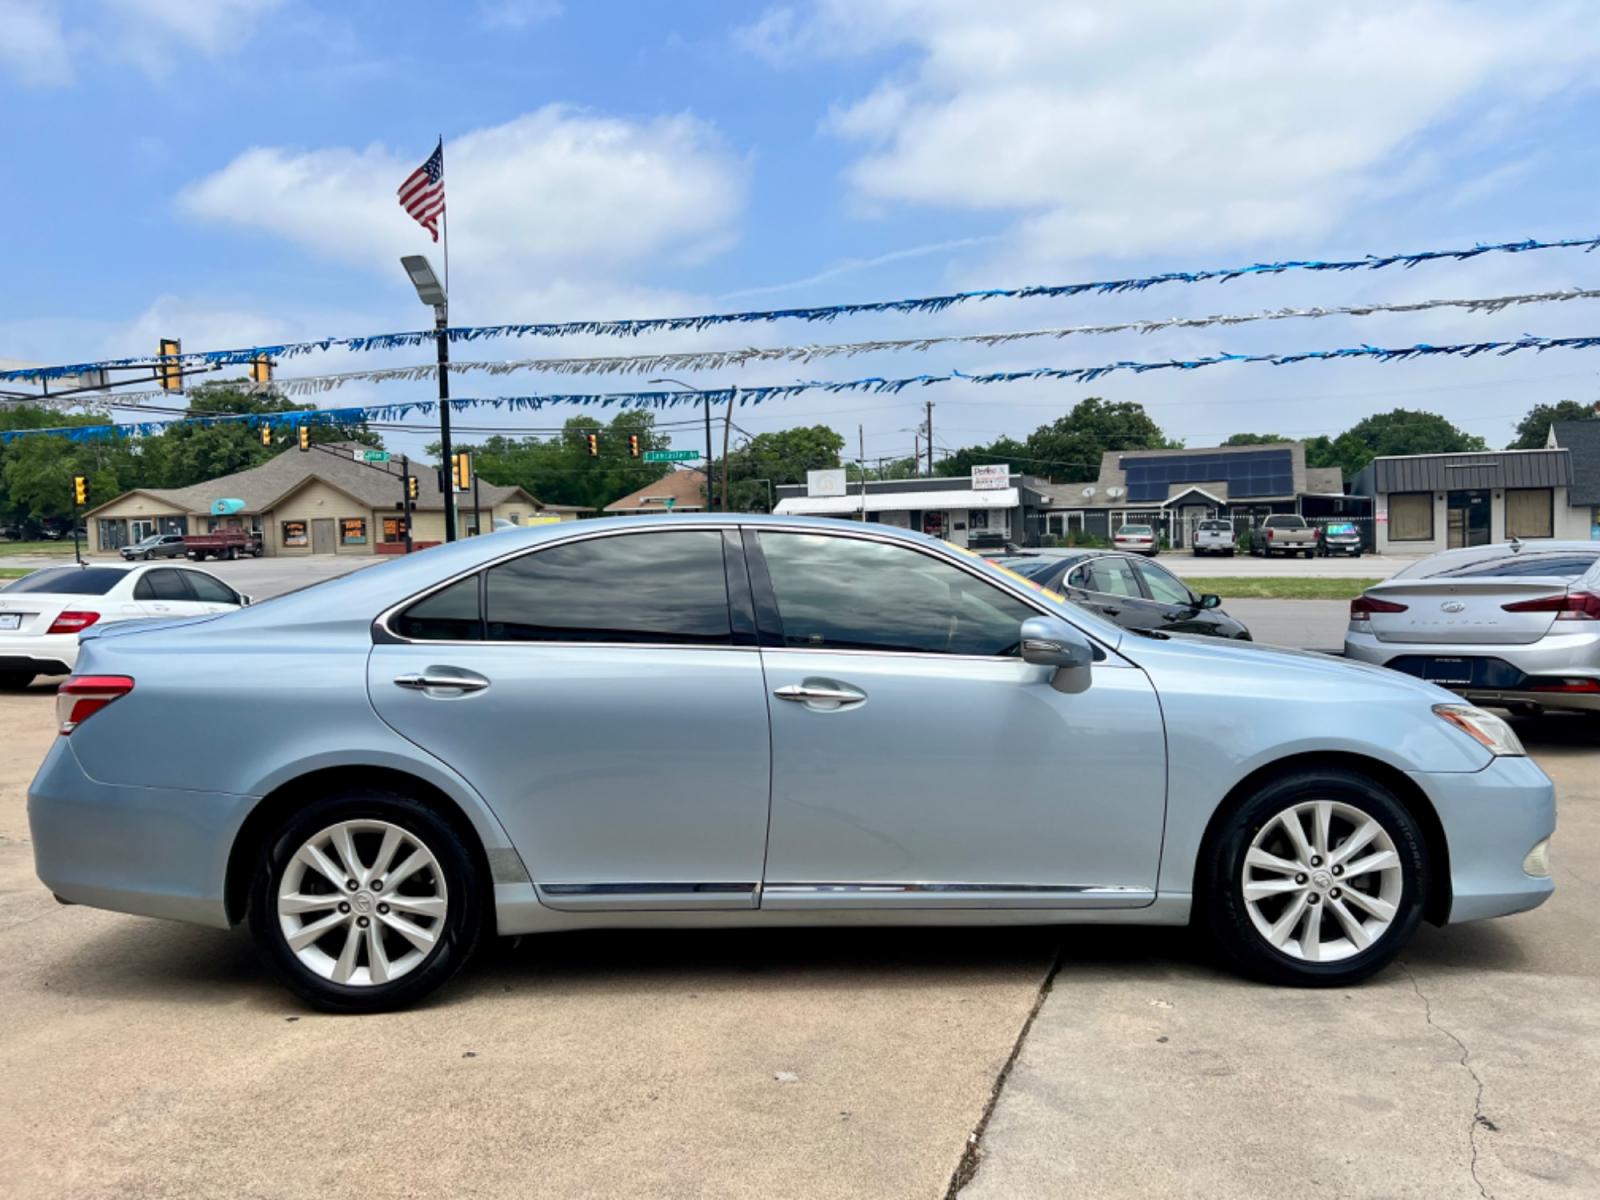 2010 BLUE /Tan LEXUS ES 350 BASE Base 4dr Sedan (JTHBK1EG3A2) with an 3.5L V6 engine, Automatic 6-Speed transmission, located at 5900 E. Lancaster Ave., Fort Worth, TX, 76112, (817) 457-5456, 0.000000, 0.000000 - Cash CASH CAR ONLY, NO FINANCING AVAILABLE. THIS 2010 LEXUS ES 350 BASE 4 DOOR SEDAN RUNS AND DRIVES GREAT. IT IS EQUIPPED WITH A CD PLAYER, AM/FM RADIO AND AN AUX PORT. THE TIRES ARE IN GOOD CONDITION AND STILL HAVE TREAD LEFT ON THEM. THIS CAR WILL NOT LAST SO ACT FAST! Call or text Fran - Photo #7